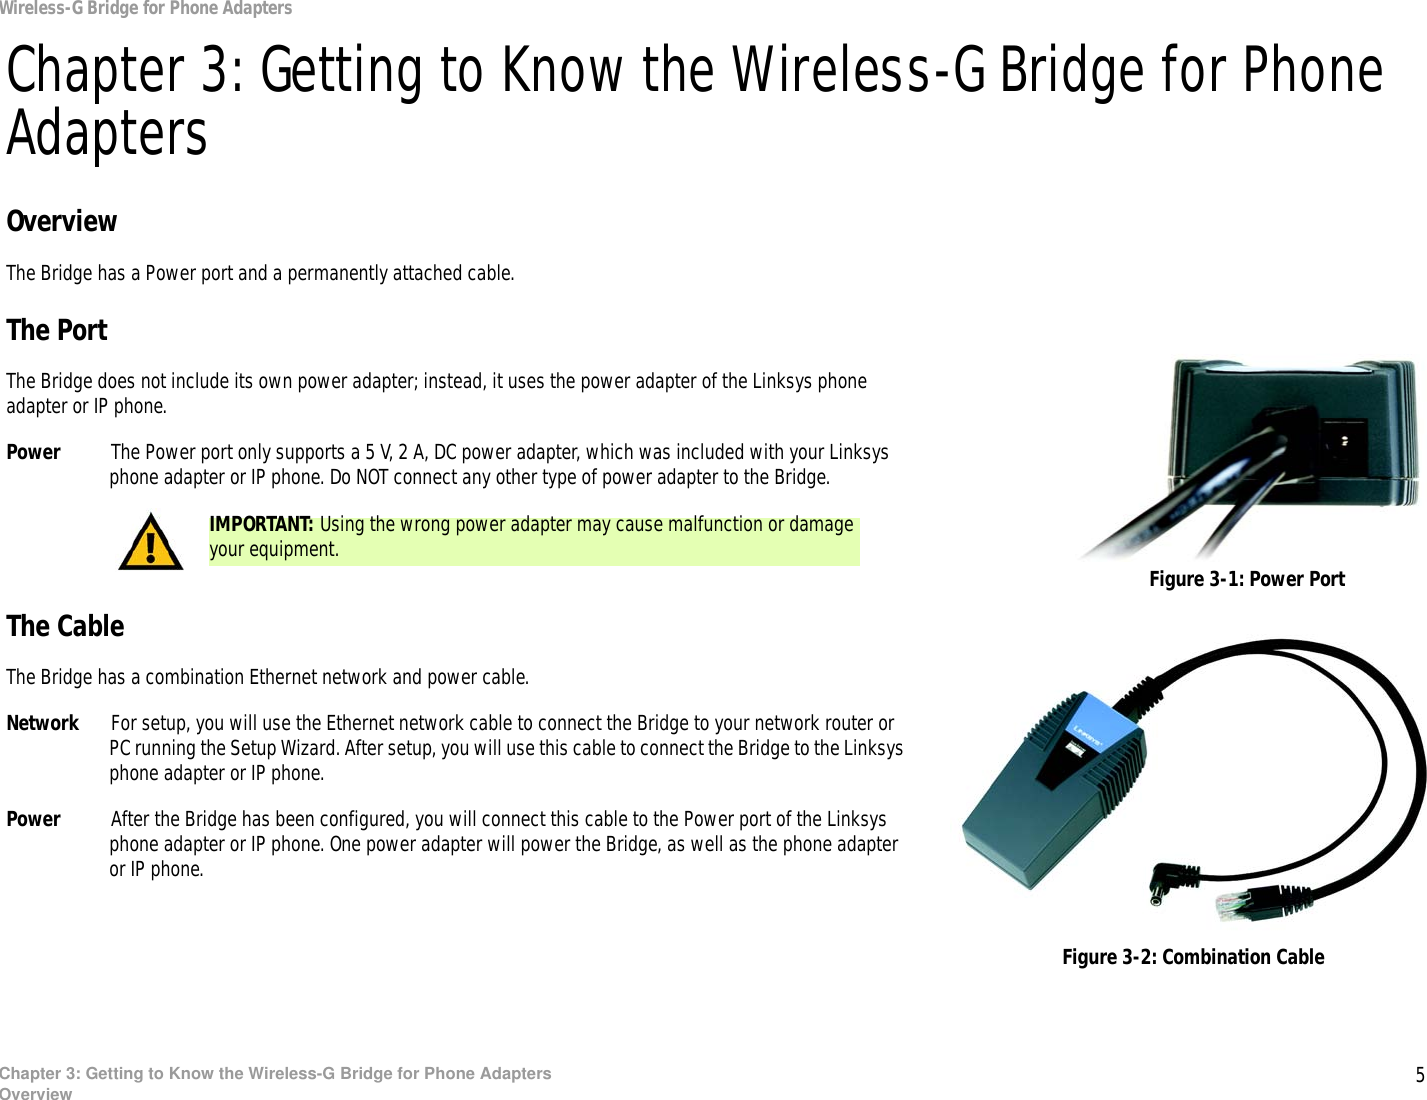 5Chapter 3: Getting to Know the Wireless-G Bridge for Phone AdaptersOverviewWireless-G Bridge for Phone AdaptersChapter 3: Getting to Know the Wireless-G Bridge for Phone AdaptersOverviewThe Bridge has a Power port and a permanently attached cable.The PortThe Bridge does not include its own power adapter; instead, it uses the power adapter of the Linksys phone adapter or IP phone.Power The Power port only supports a 5 V, 2 A, DC power adapter, which was included with your Linksys phone adapter or IP phone. Do NOT connect any other type of power adapter to the Bridge.The CableThe Bridge has a combination Ethernet network and power cable.Network For setup, you will use the Ethernet network cable to connect the Bridge to your network router or PC running the Setup Wizard. After setup, you will use this cable to connect the Bridge to the Linksys phone adapter or IP phone.Power After the Bridge has been configured, you will connect this cable to the Power port of the Linksys phone adapter or IP phone. One power adapter will power the Bridge, as well as the phone adapter or IP phone.Figure 3-1: Power PortFigure 3-2: Combination CableIMPORTANT: Using the wrong power adapter may cause malfunction or damage your equipment.